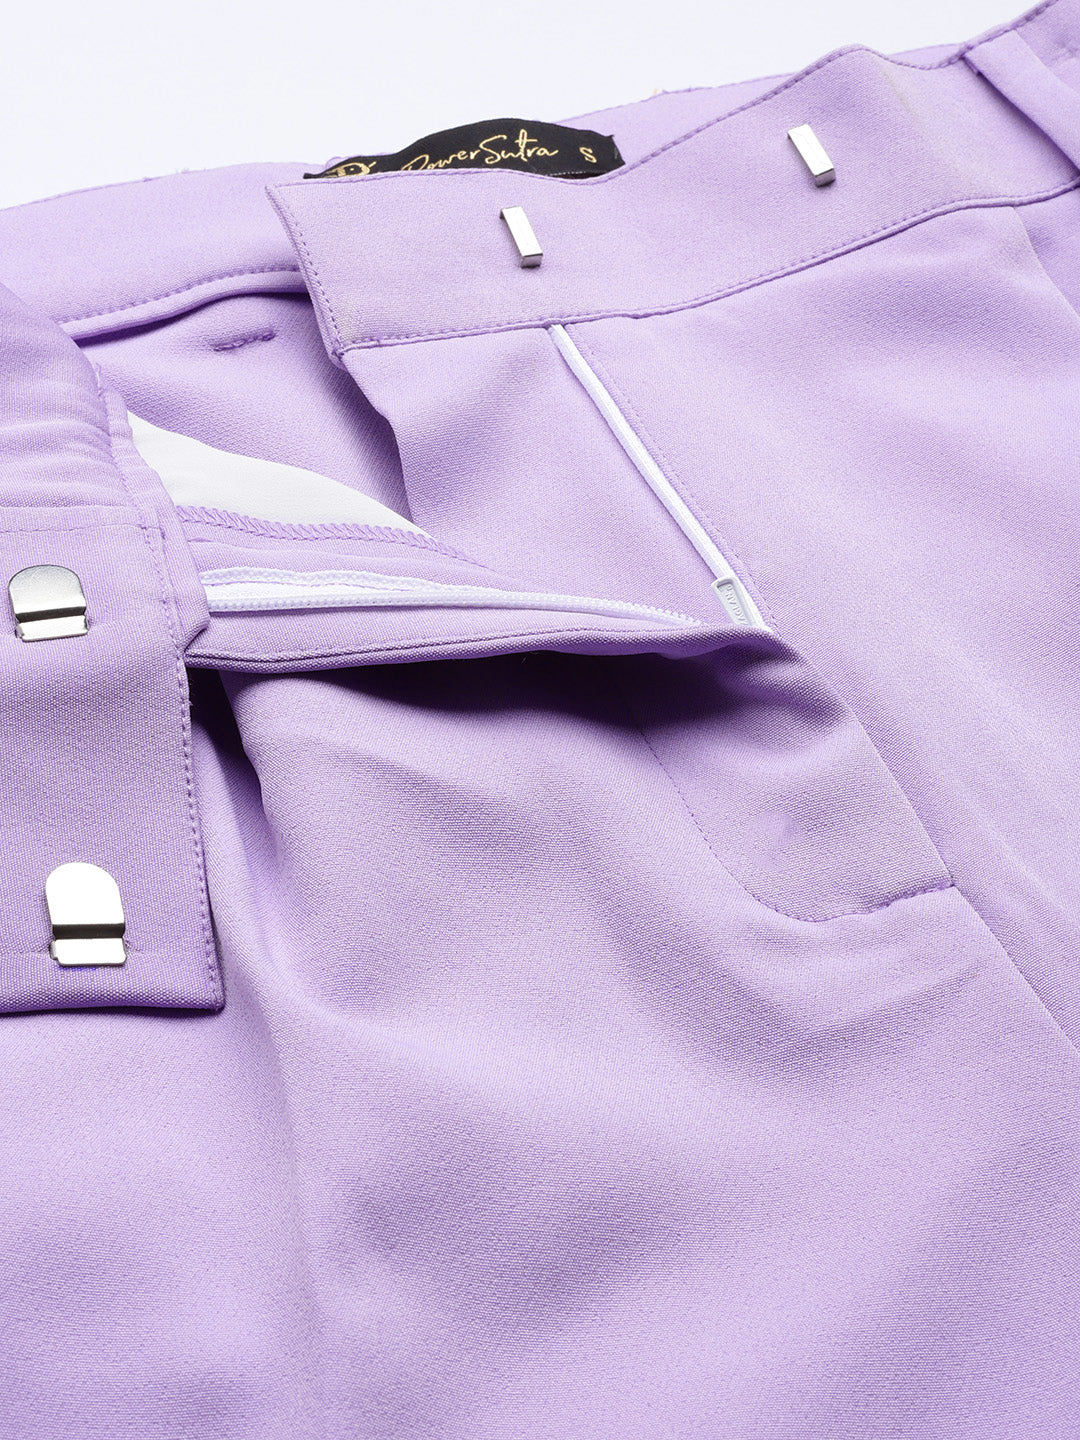 Comfort Fit Stretch Pleated Trouser - Lavender